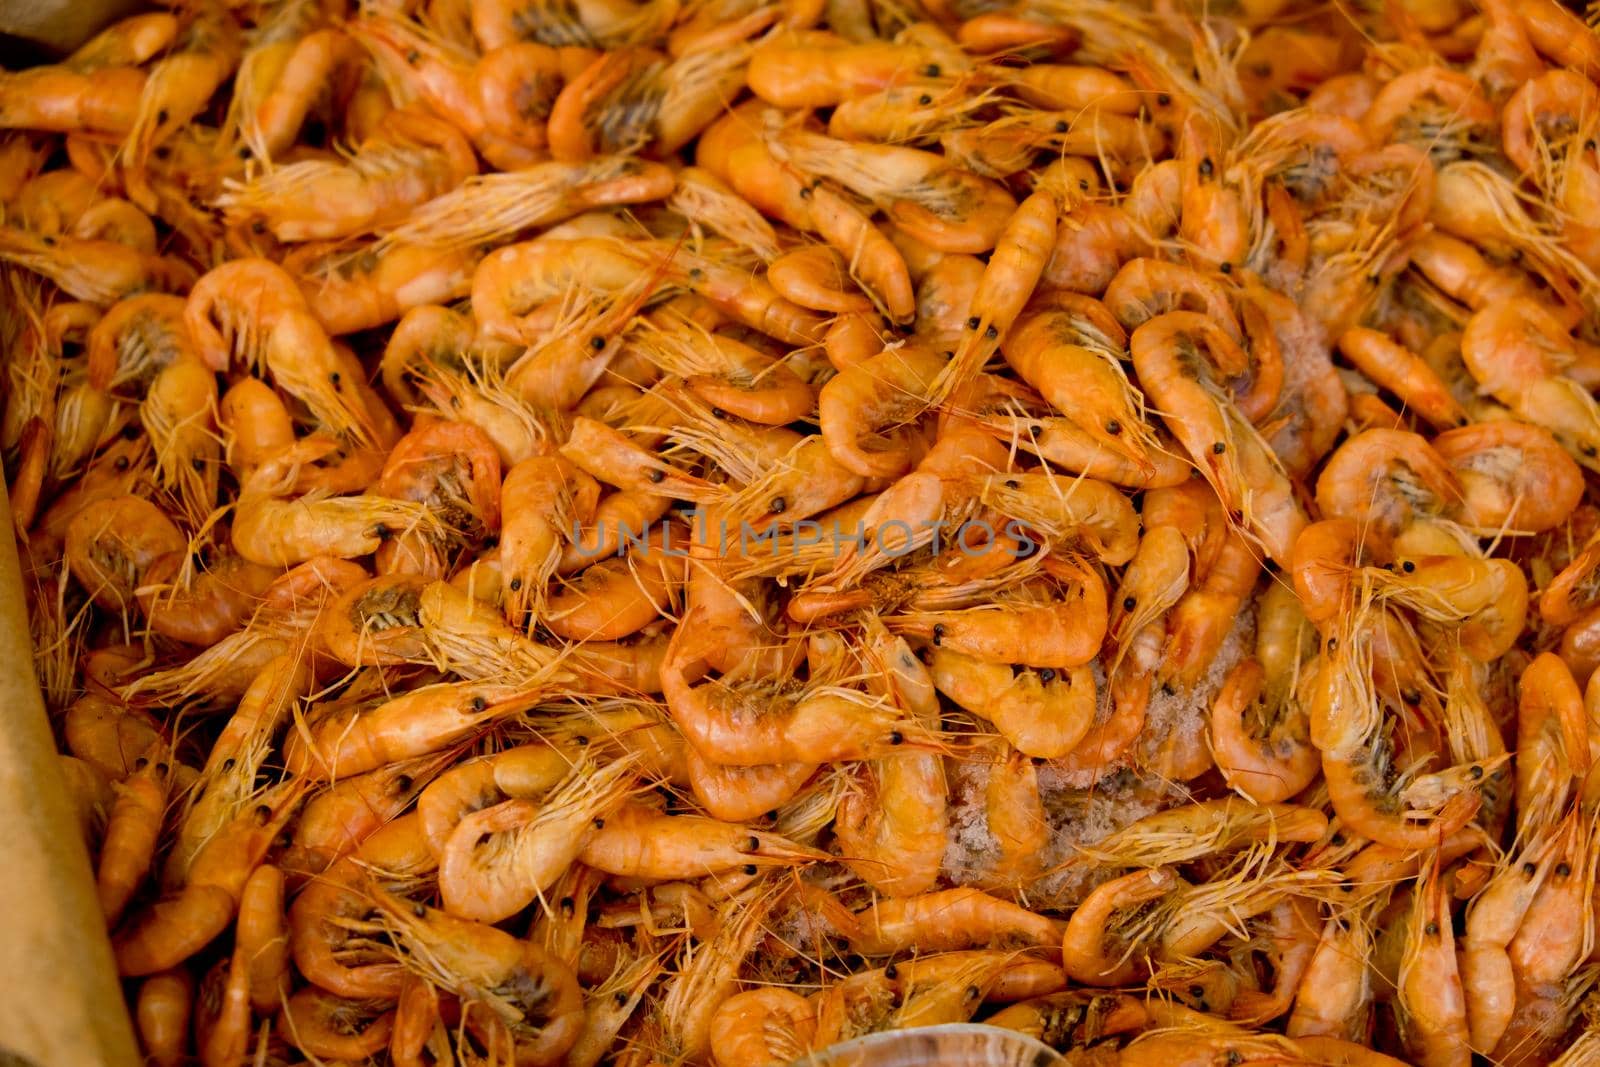 Small fresh boiled pink shrimp ready to eat. Street food festival. Selective focus. Close-up. Food background. by leonik